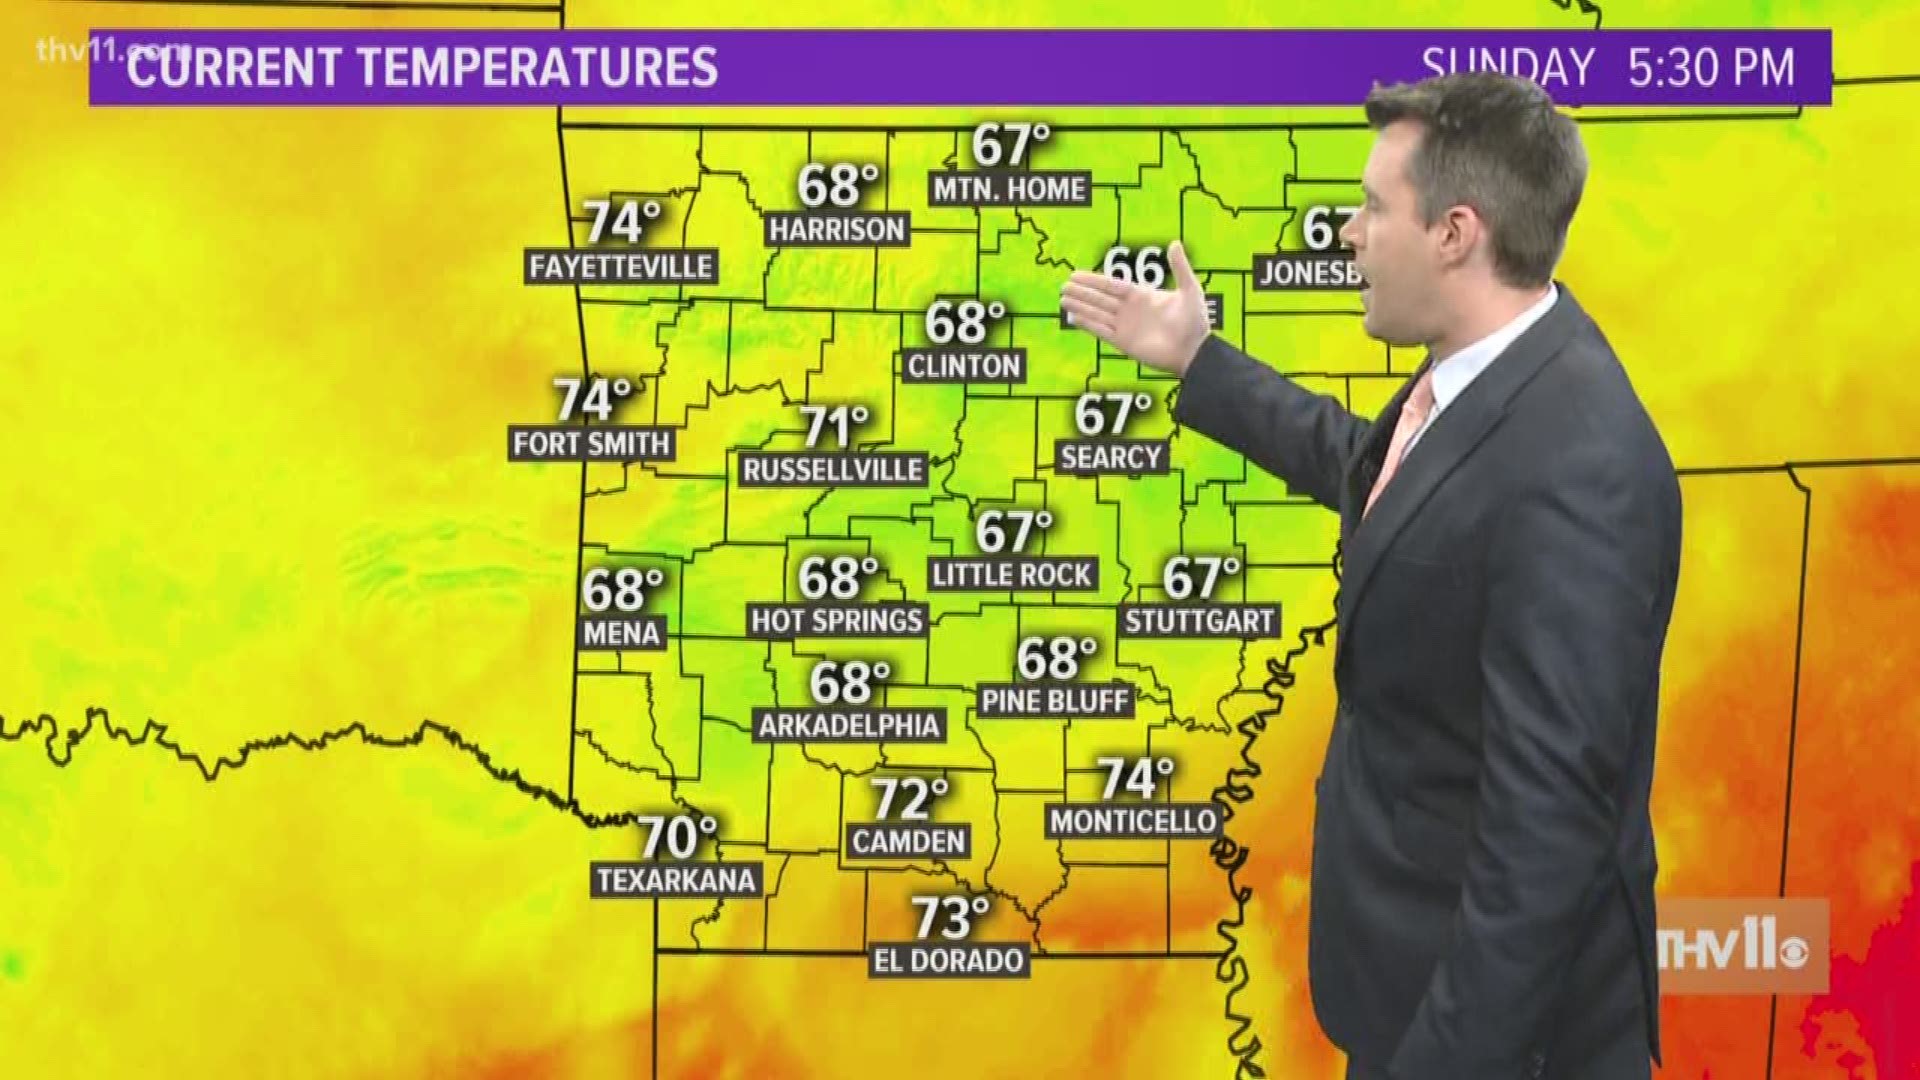 Nathan Scott gives us a look at the upcoming weather.